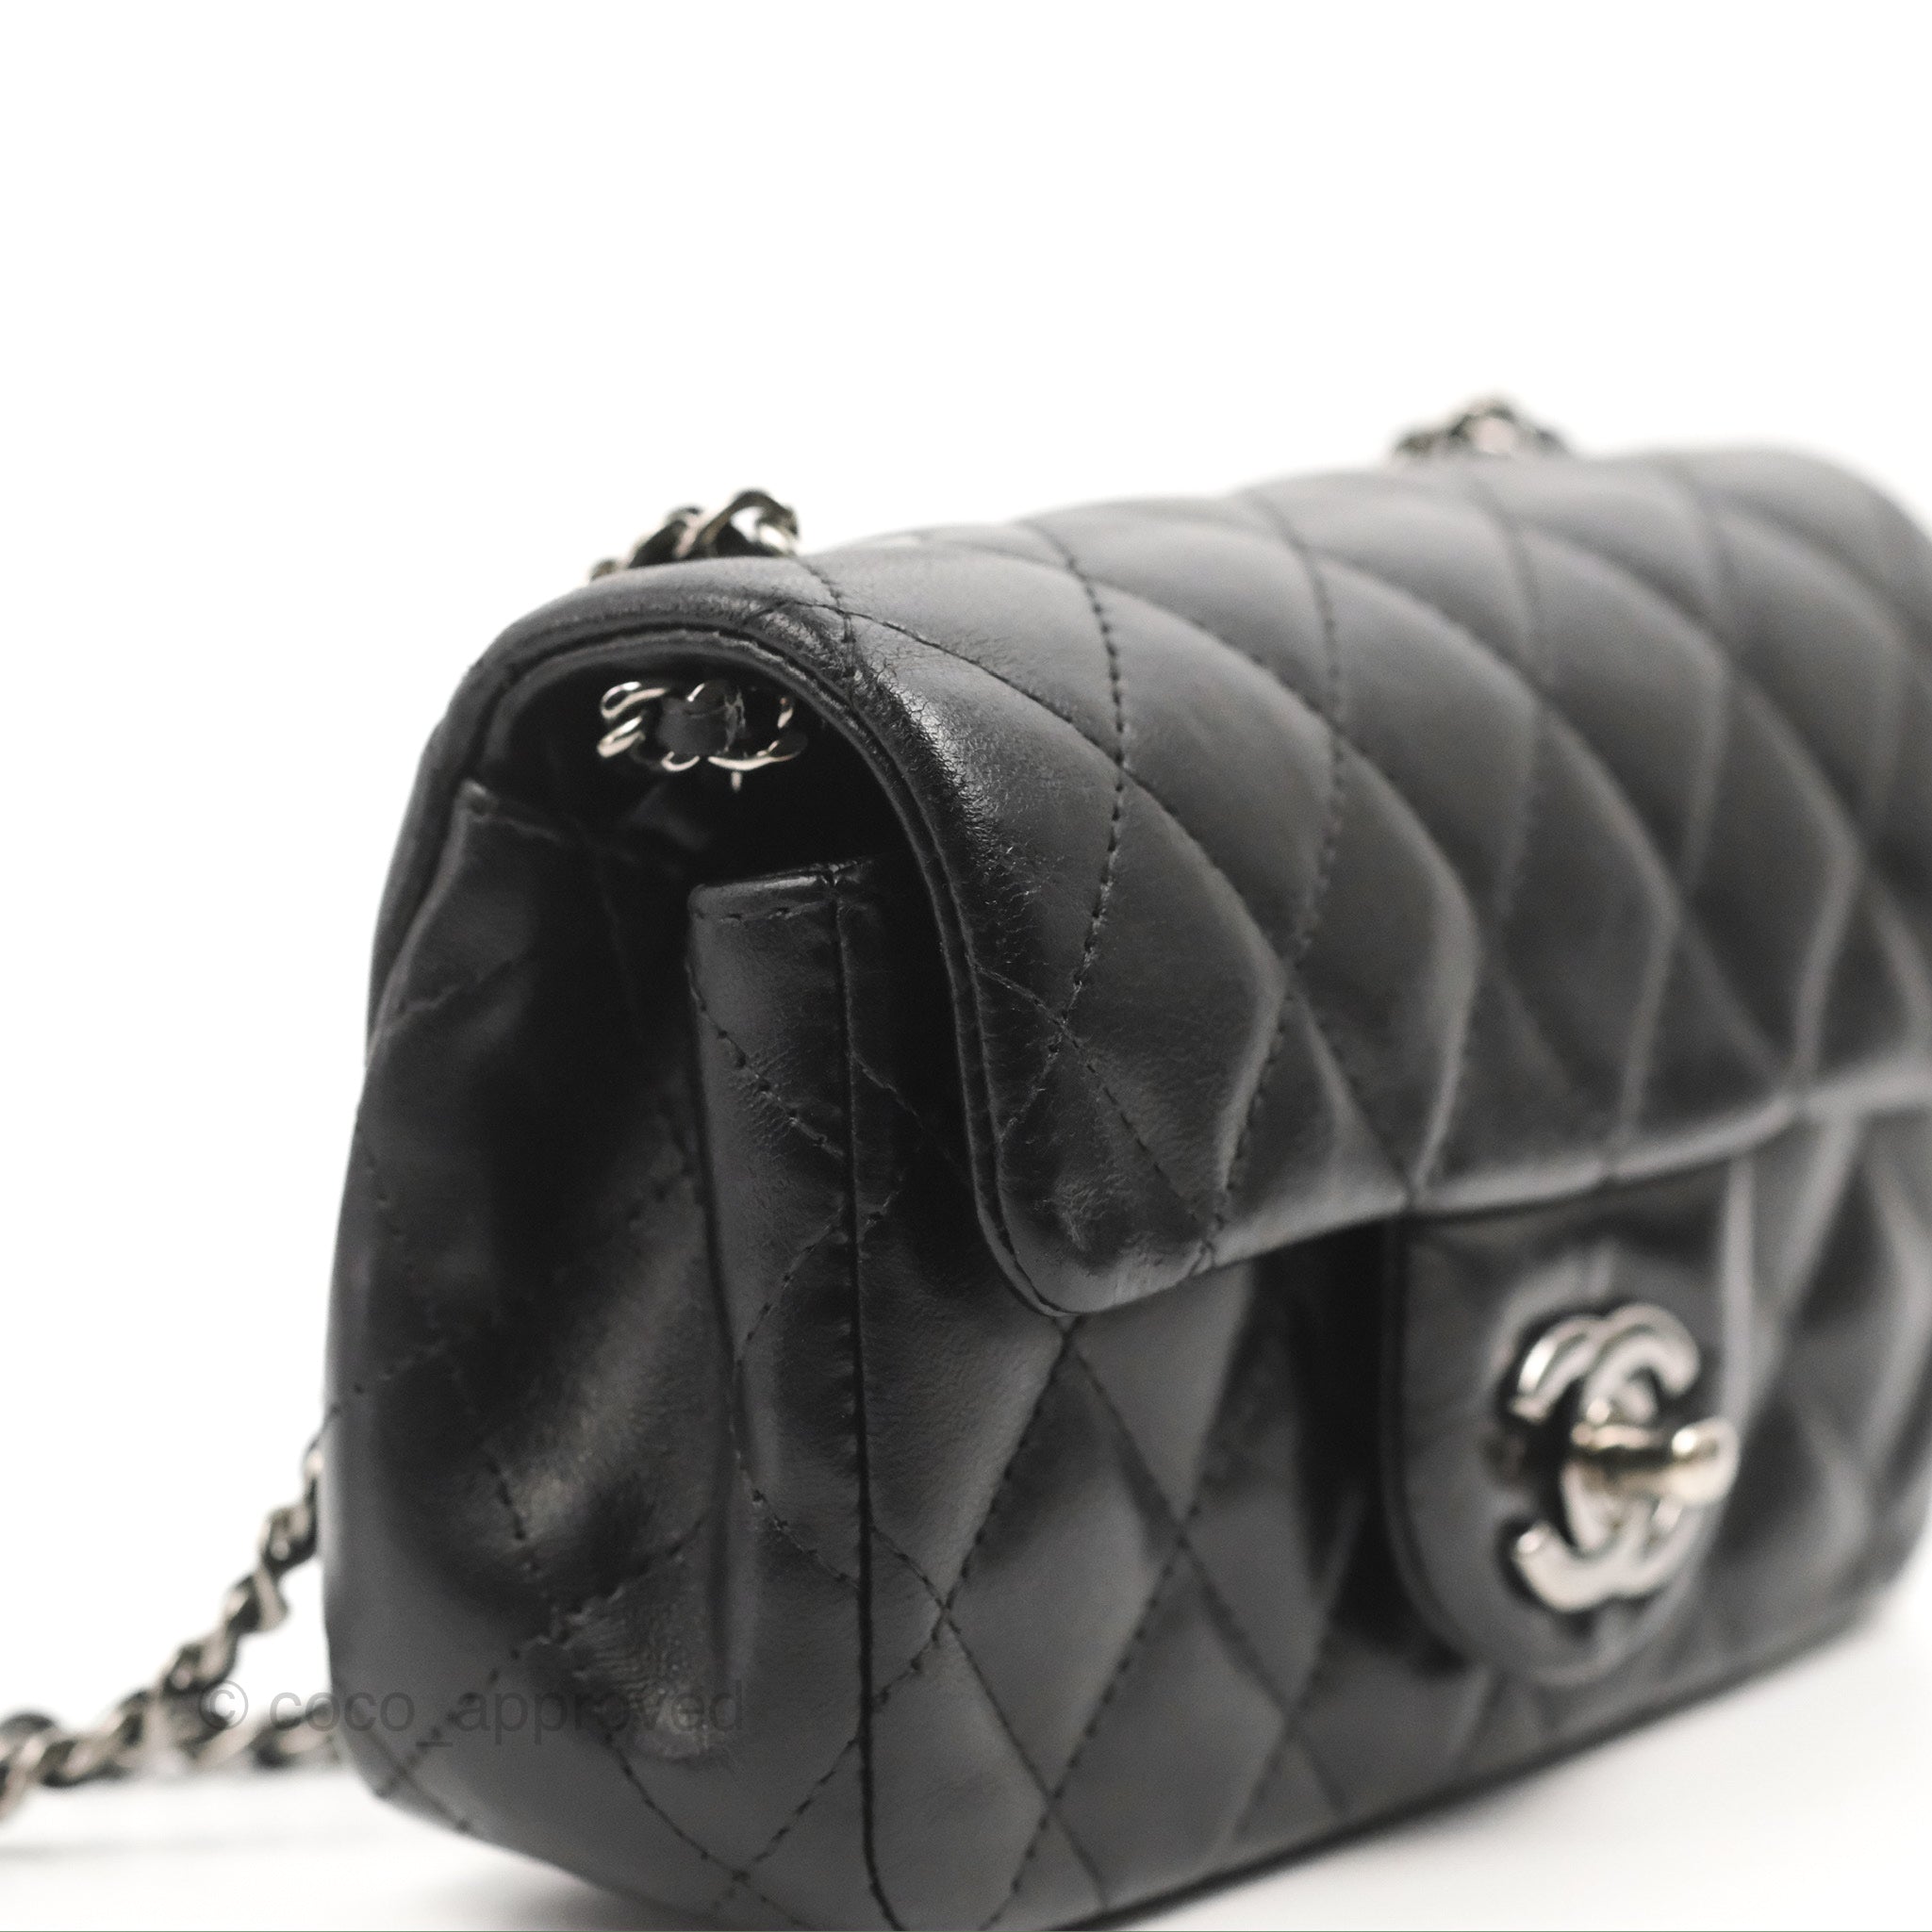 Chanel Quilted Extra Mini Rectangular Flap Black Calfskin Silver Hardw –  Coco Approved Studio